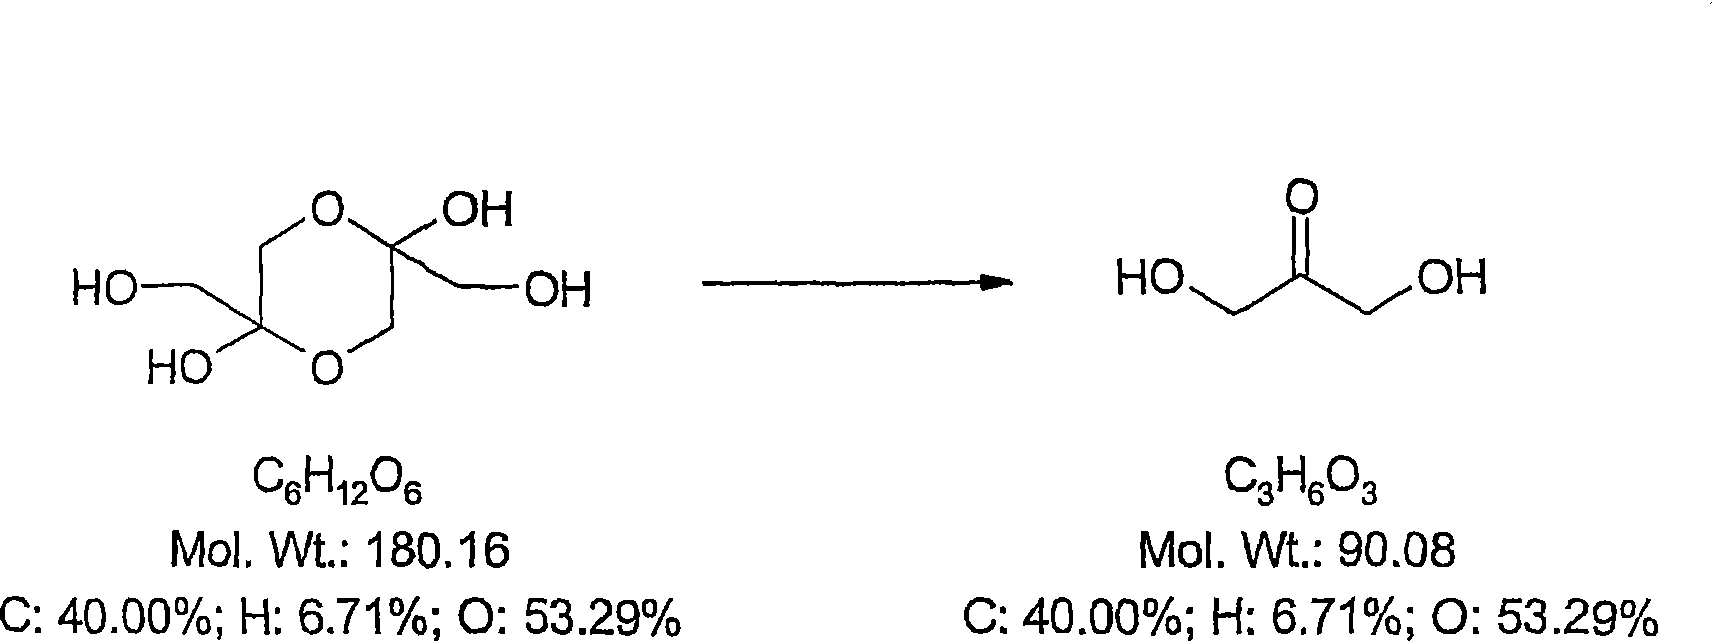 Use of alpha-hydroxy carbonyl compounds as reducing agents